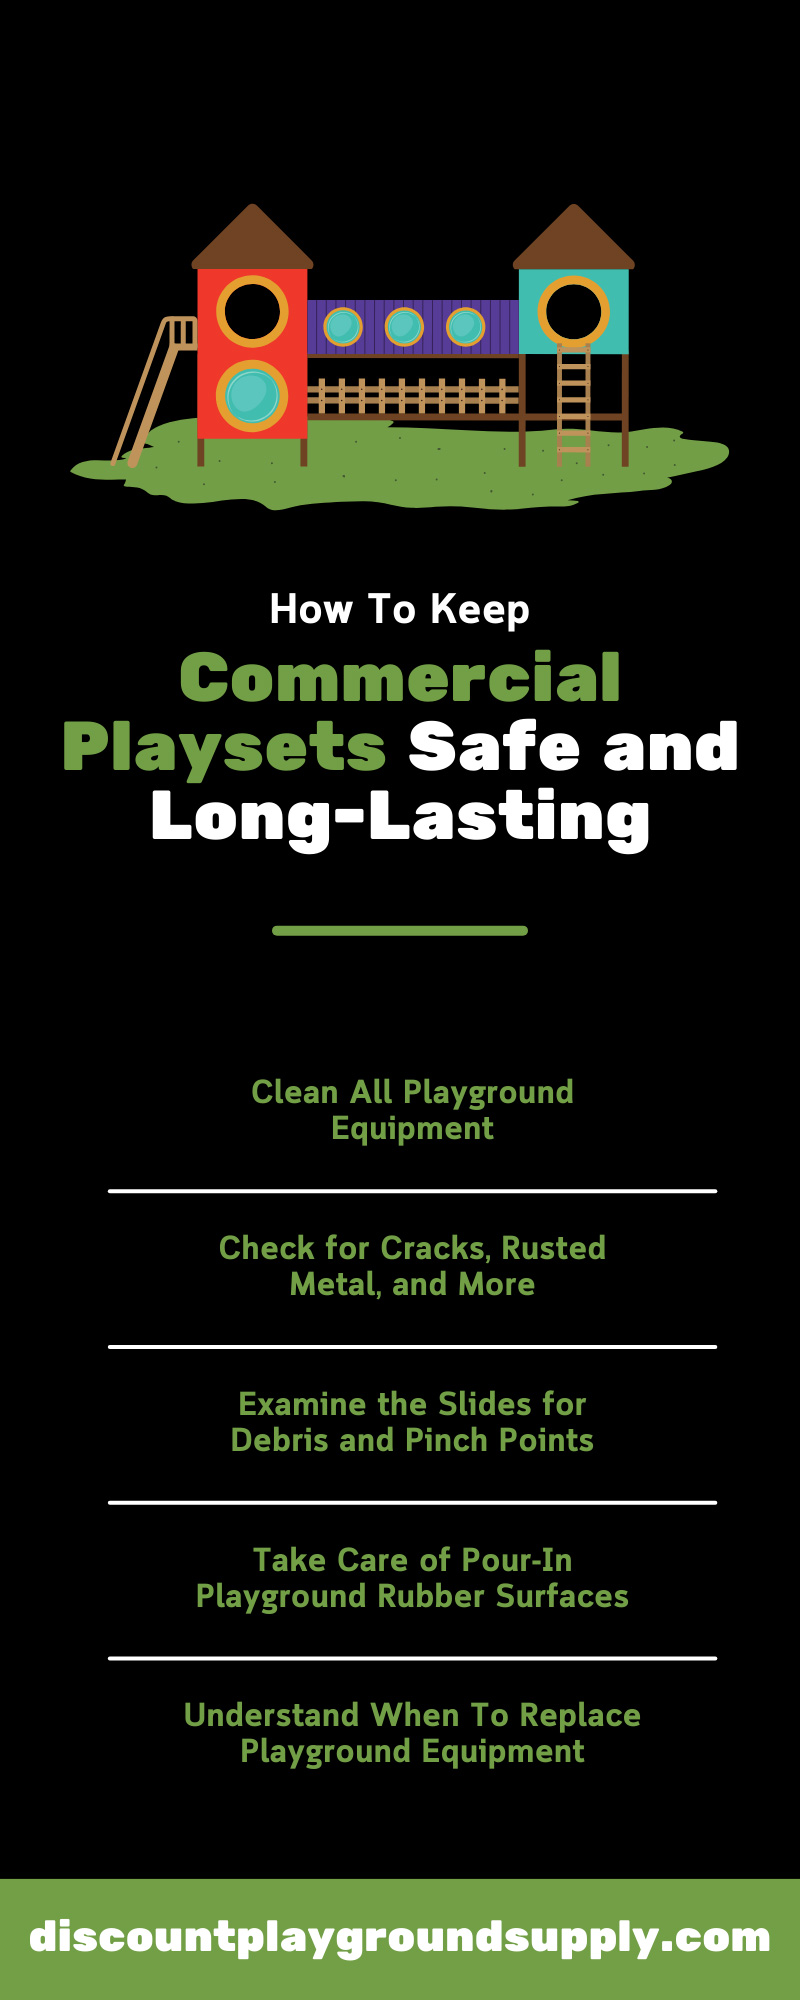 How To Keep Commercial Playsets Safe and Long-Lasting